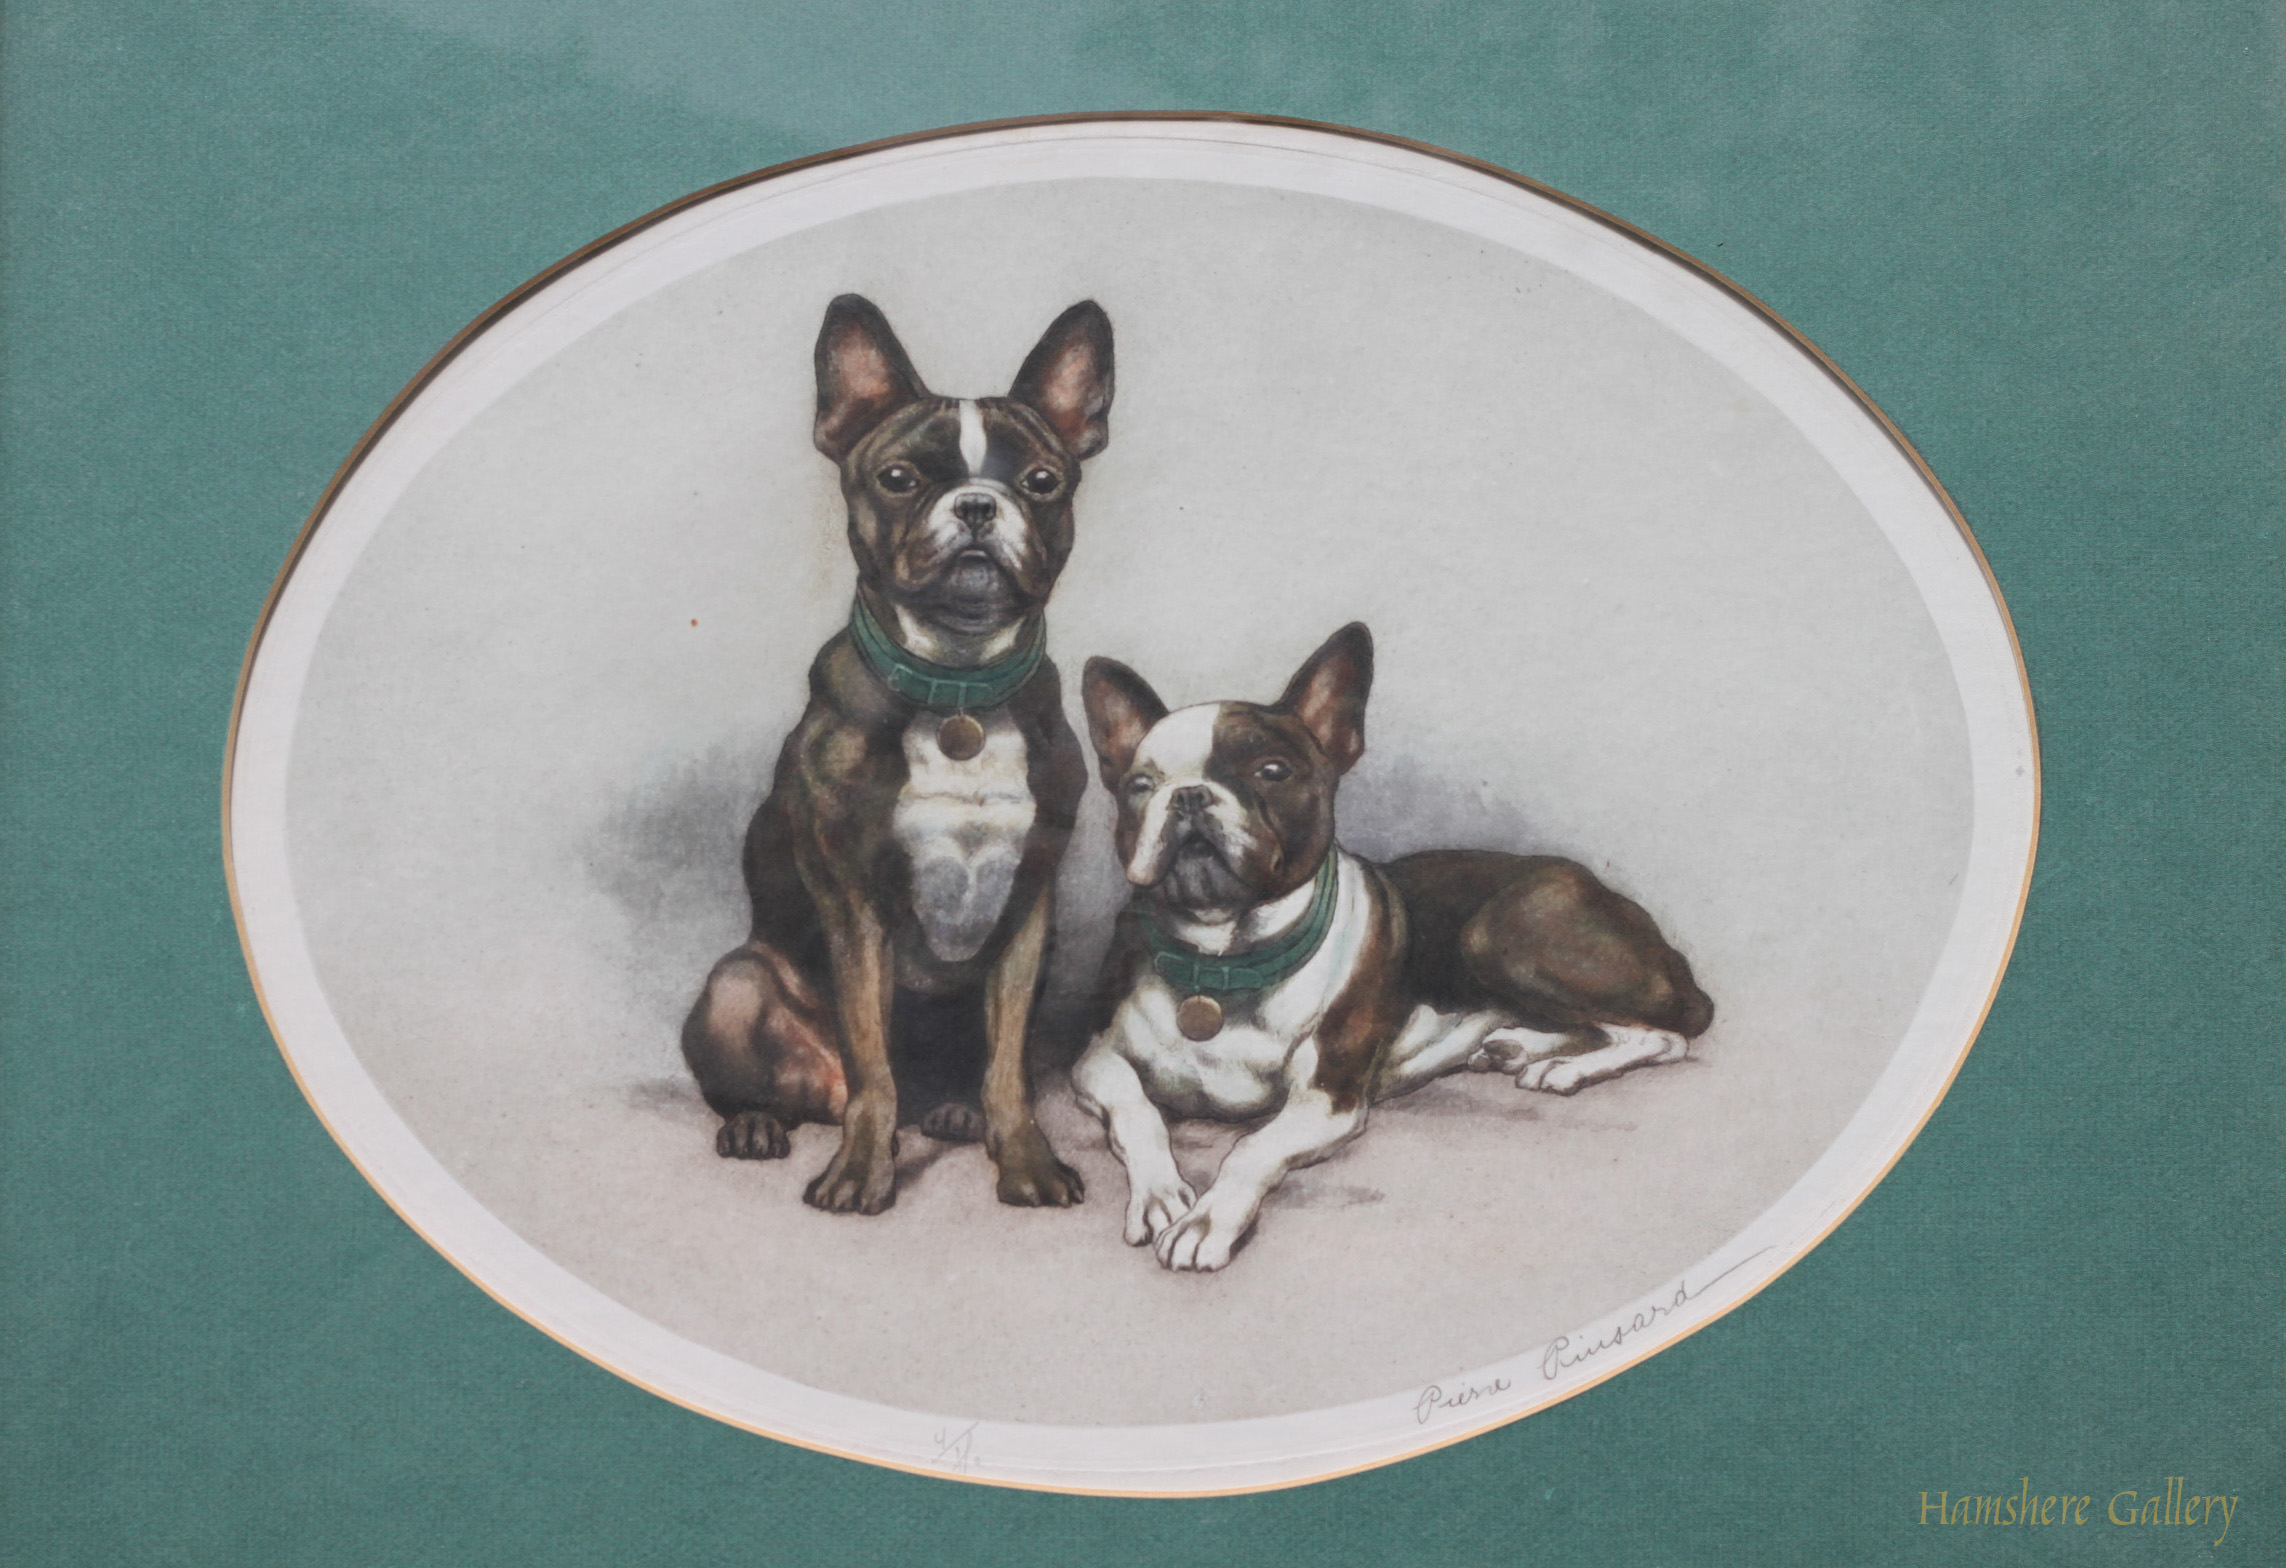 Click for larger image: French Bulldogs by Pierre Pinsard - French Bulldogs by Pierre Pinsard